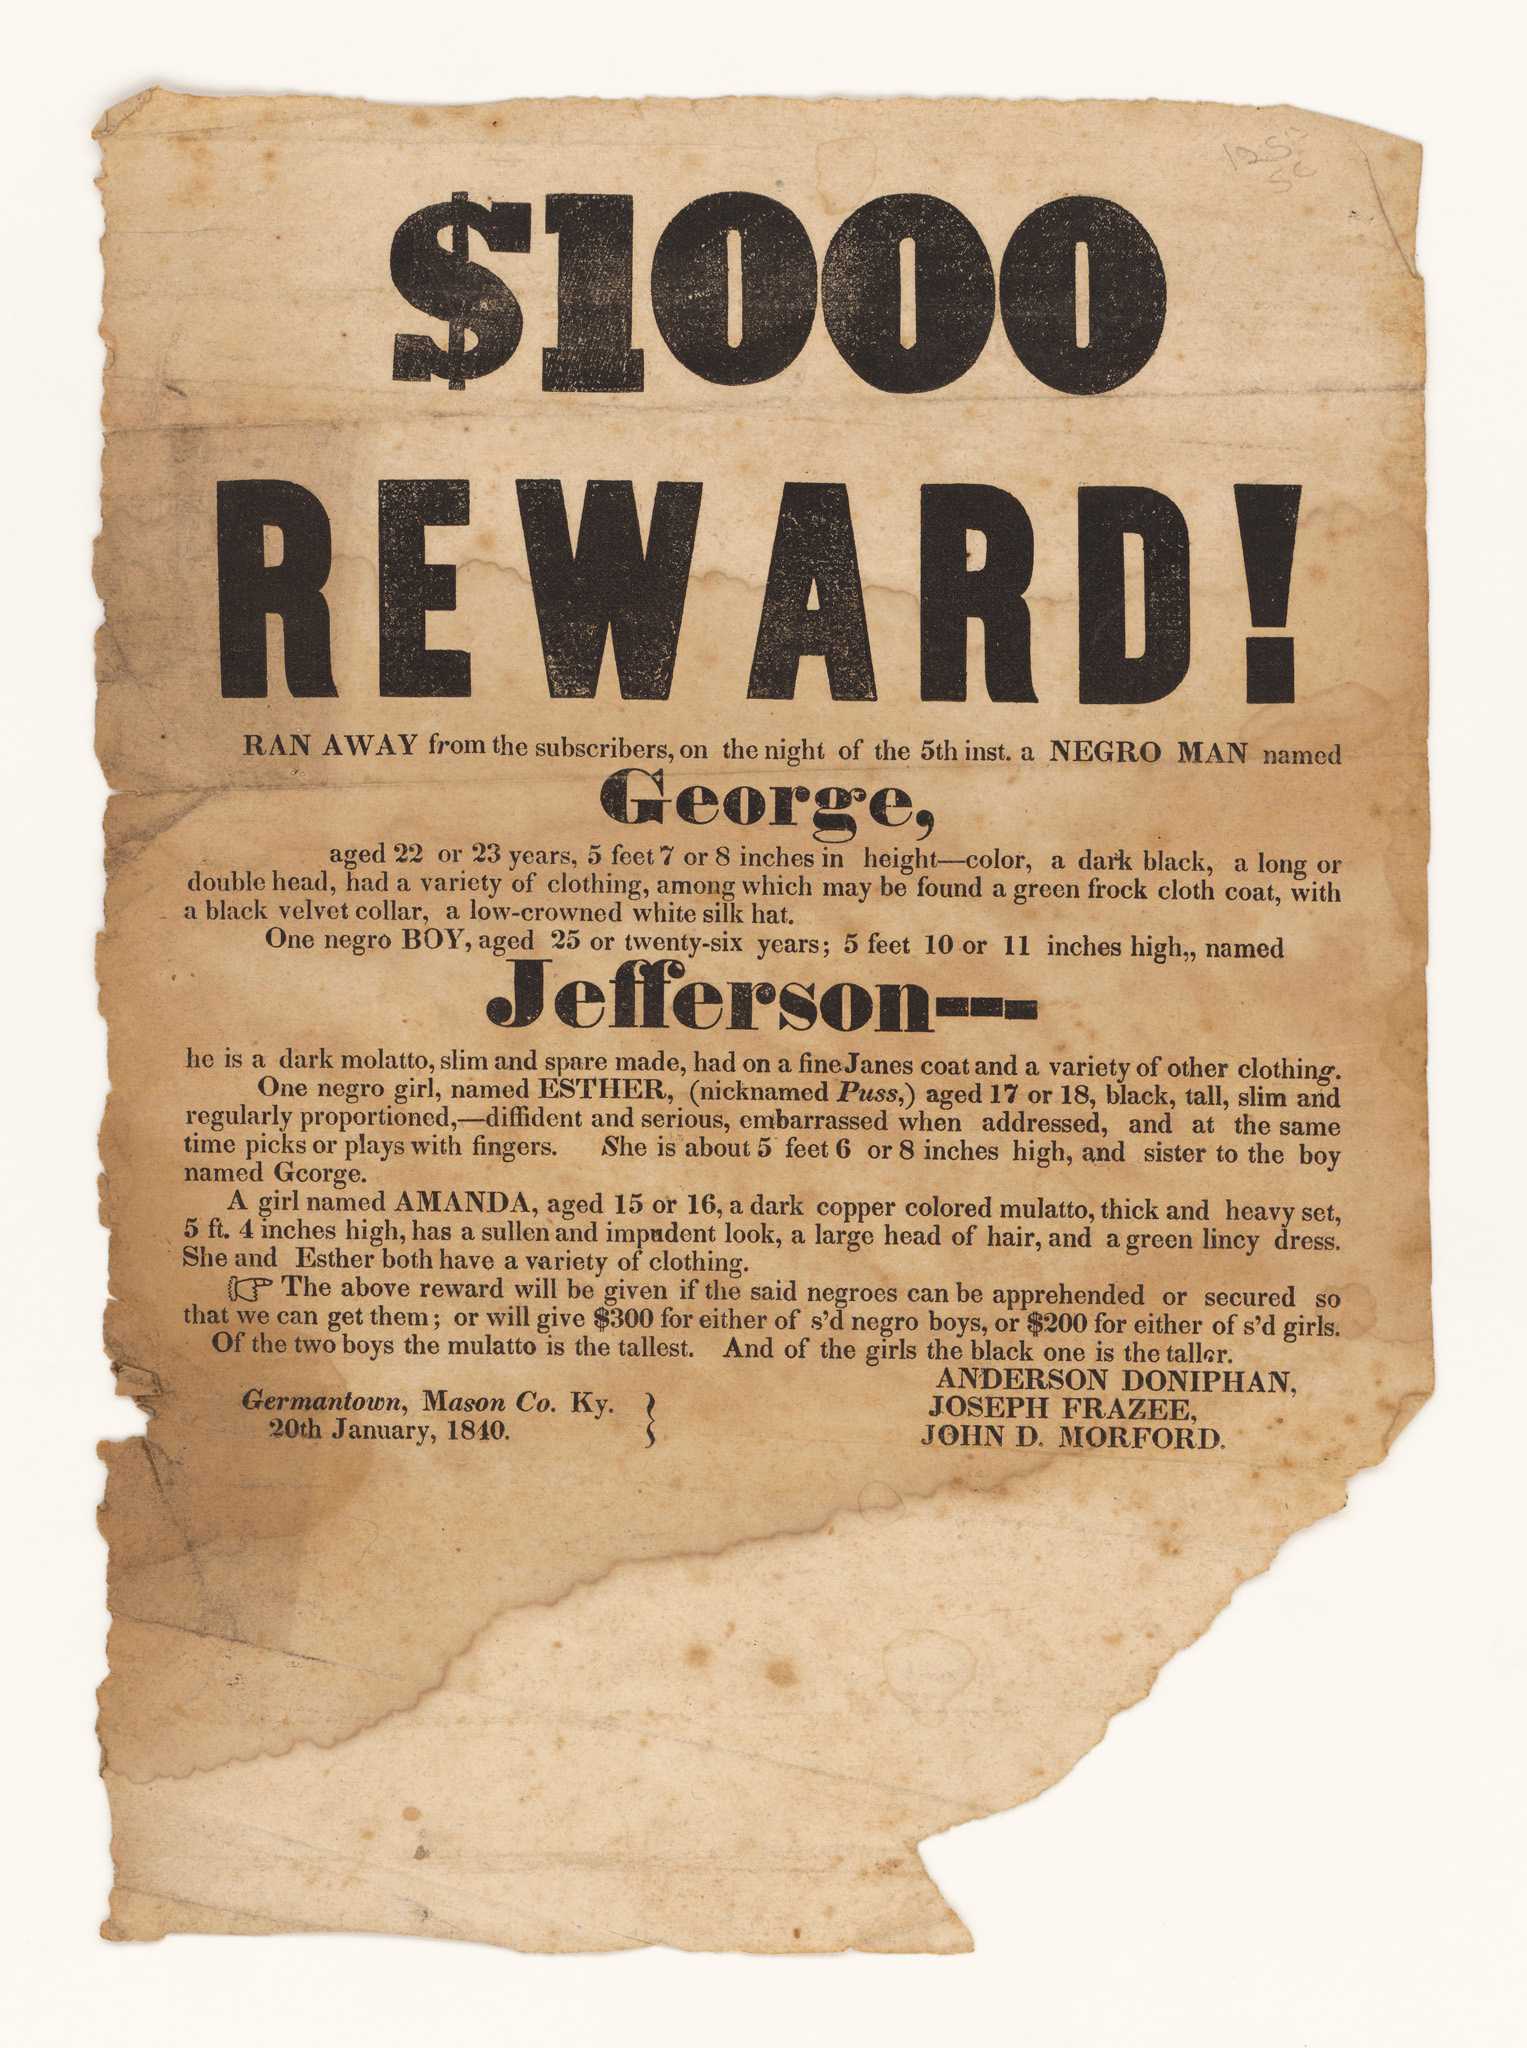 A broadside with printed black text on off-white paper. Large, bold text at the top reads [$1000 / REWARD!] Followed by smaller text reading [RAN AWAY from the subscribers on the night of the 5th inst. a NEGRO MAN named / George, / aged 22 or 23 years, 5 feet 7 or 8 inches in height] and goes on to describe his appearance and possible clothing, which includes [a green frock cloth coat, with a black velvet collar, a low-crowned white silk hat]. The text then continues on to describe [one negro BOY, aged 25 or twenty-six years; named / Jefferson], as well as [One negro girl named ESTHER (nicknamed Puss,) aged 17 or 18, black, tall, slim and regularly proportioned, - diffident and serious, embarrassed hen addressed, and at the same time picks or plays with fingers.] who is the sister of George, and [a girl named AMANDA, aged 15 or 16, a dark copper colored mulatto, thick and heavy set, 5 ft. 4 inches high, has a sullen and impudent look, a large head of hair, and a green lincy dress.] The text goes on to give the terms of the reward, which promised $300 for either George or Jefferson and $200 for either Esther or Amanda. At bottom left is [Germantown, Mason Co. Ky. / 20th January, 1840] and at bottom right are the names of the posters: [ANDERSON DONIPHAN / JOSEPH FRAZEE / JOHN D. MORFORD]. There is considerable loss at the bottom right corner of the page.